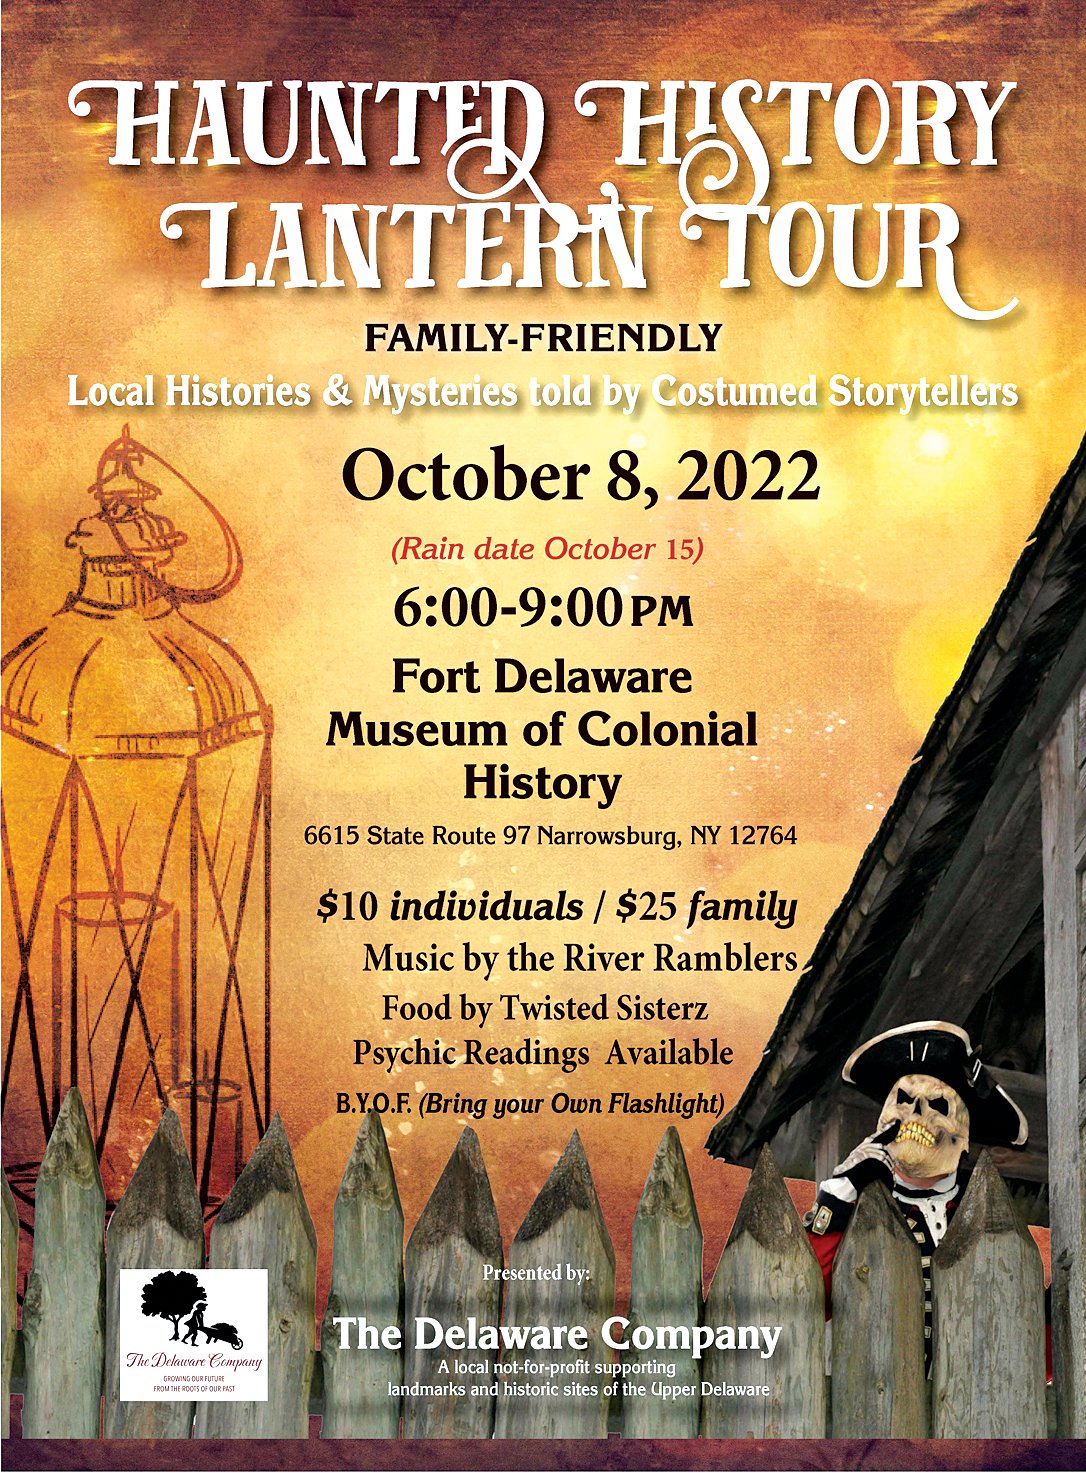 The Haunted History Tour will be held this year at Fort Delaware on Saturday, October 8 from 6-9 p.m.